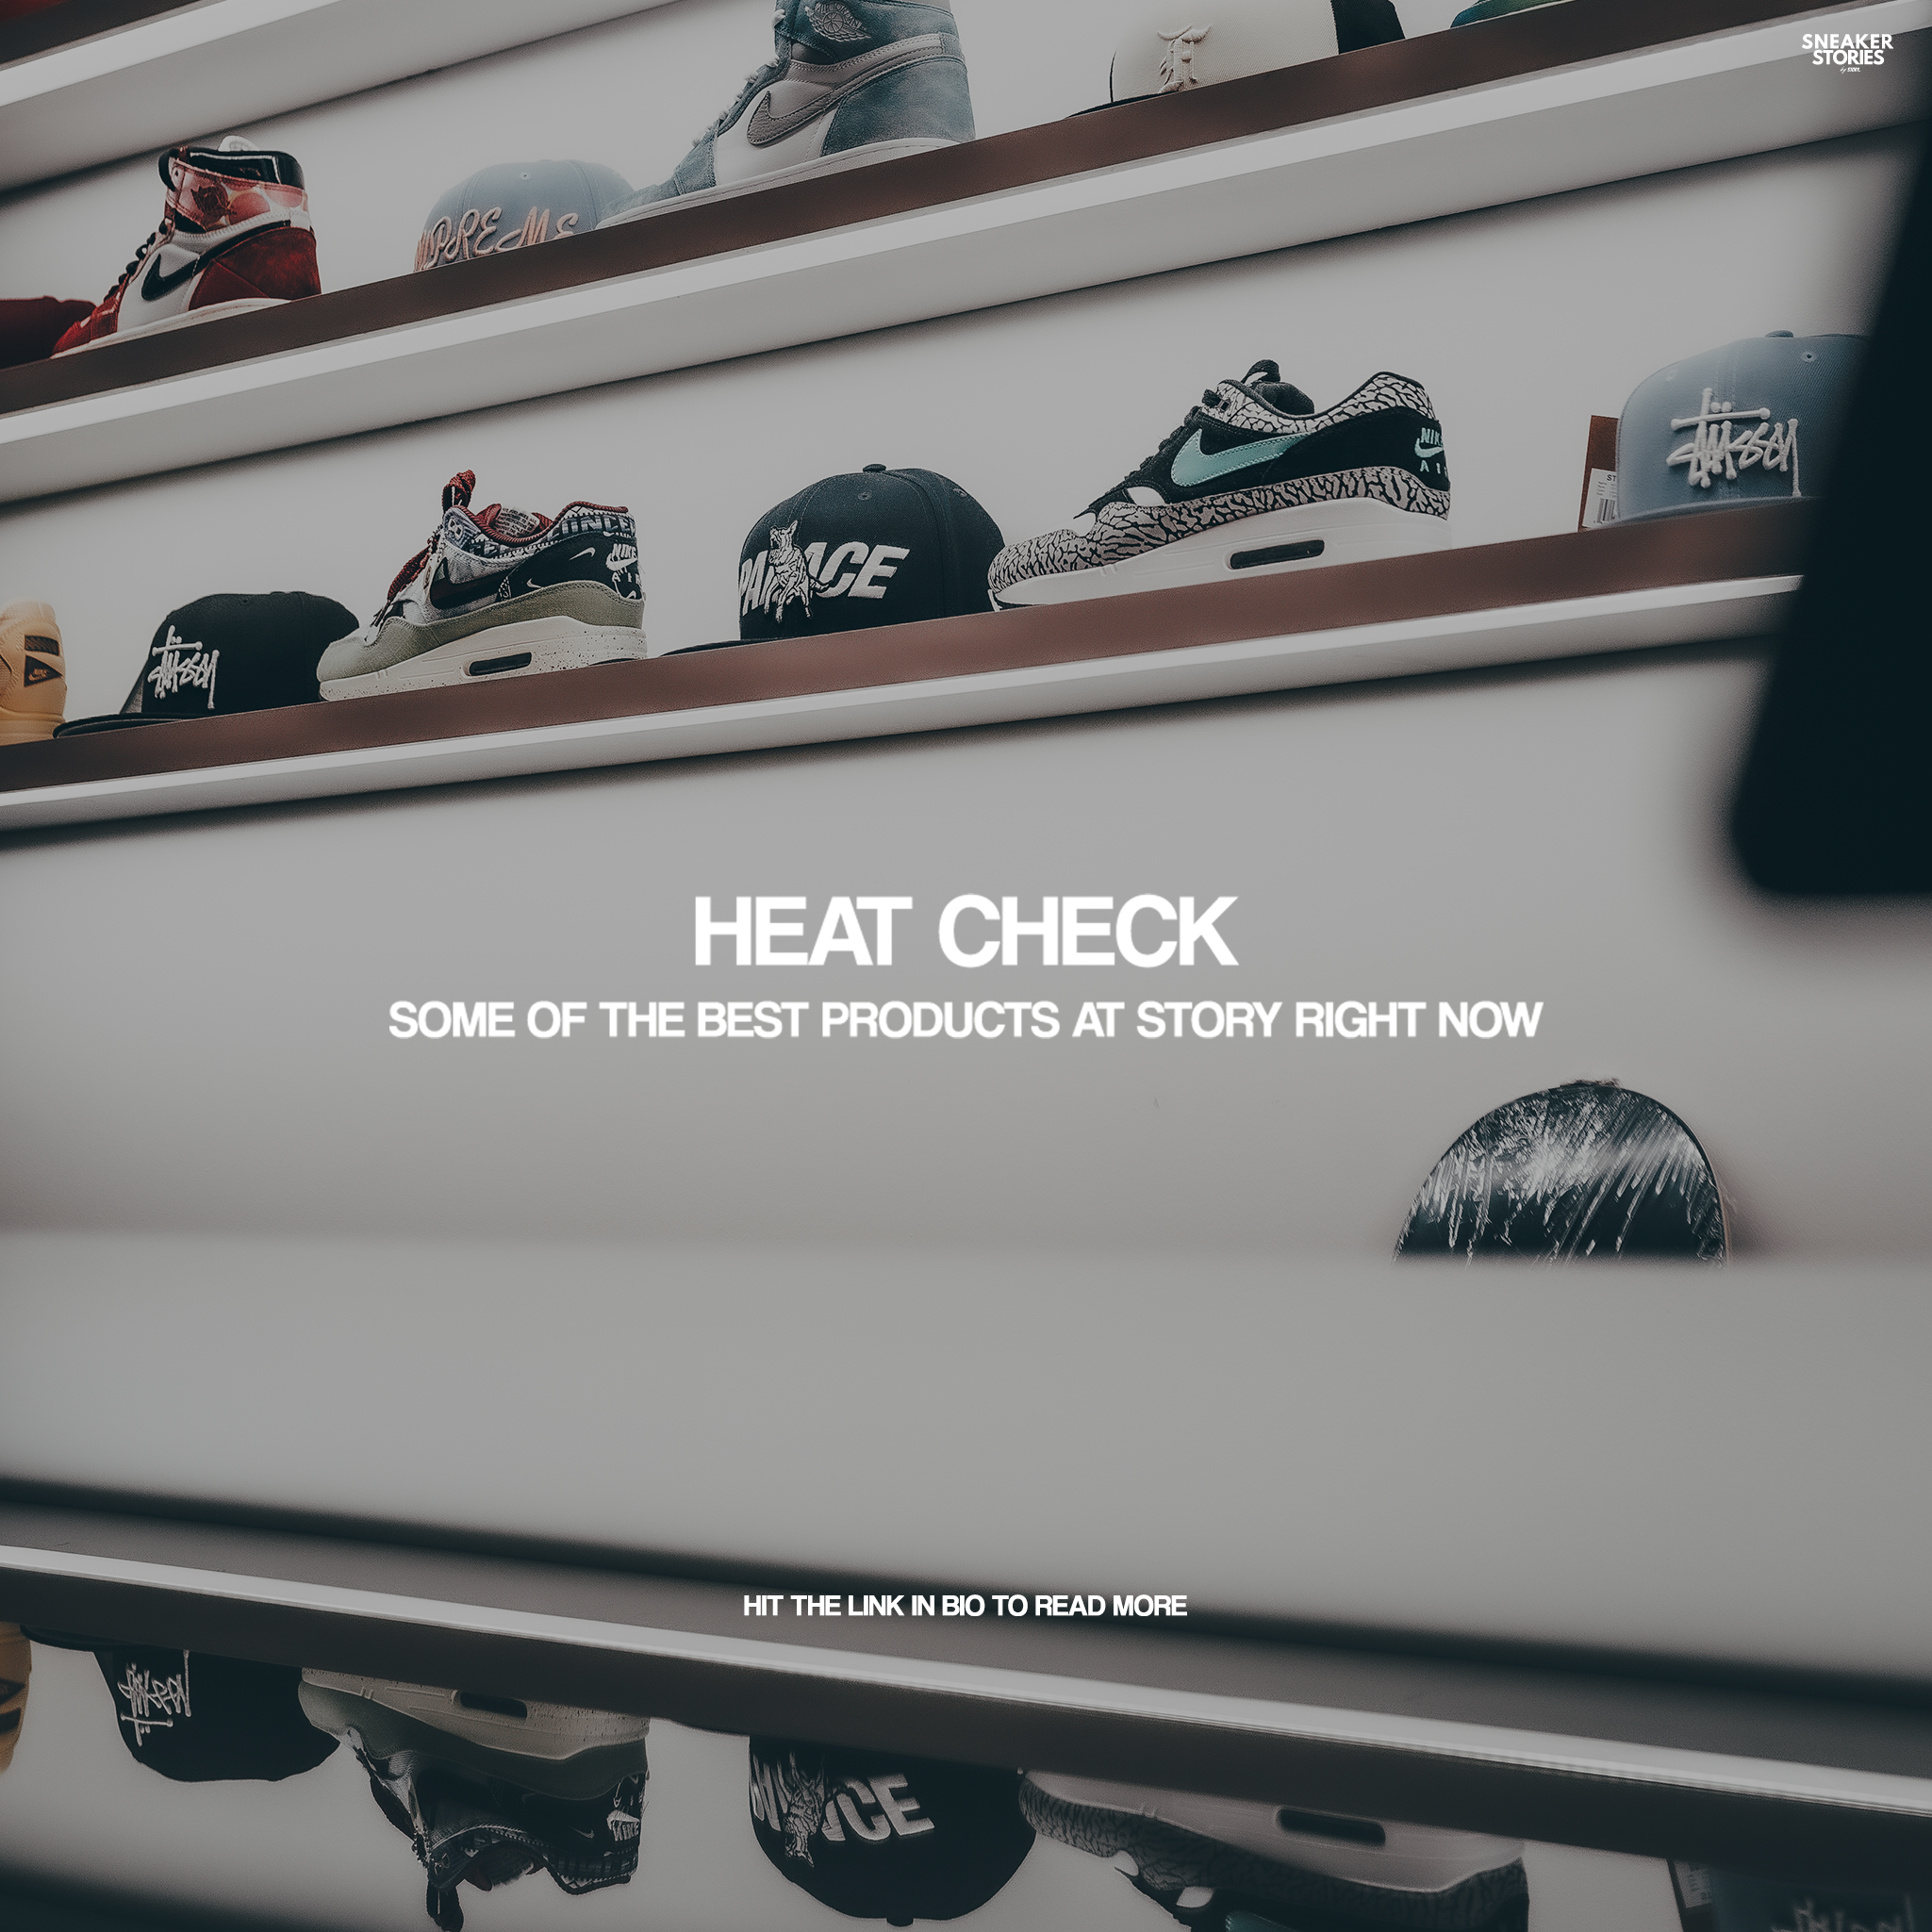 Heat Check: Some of the best products at Story right now